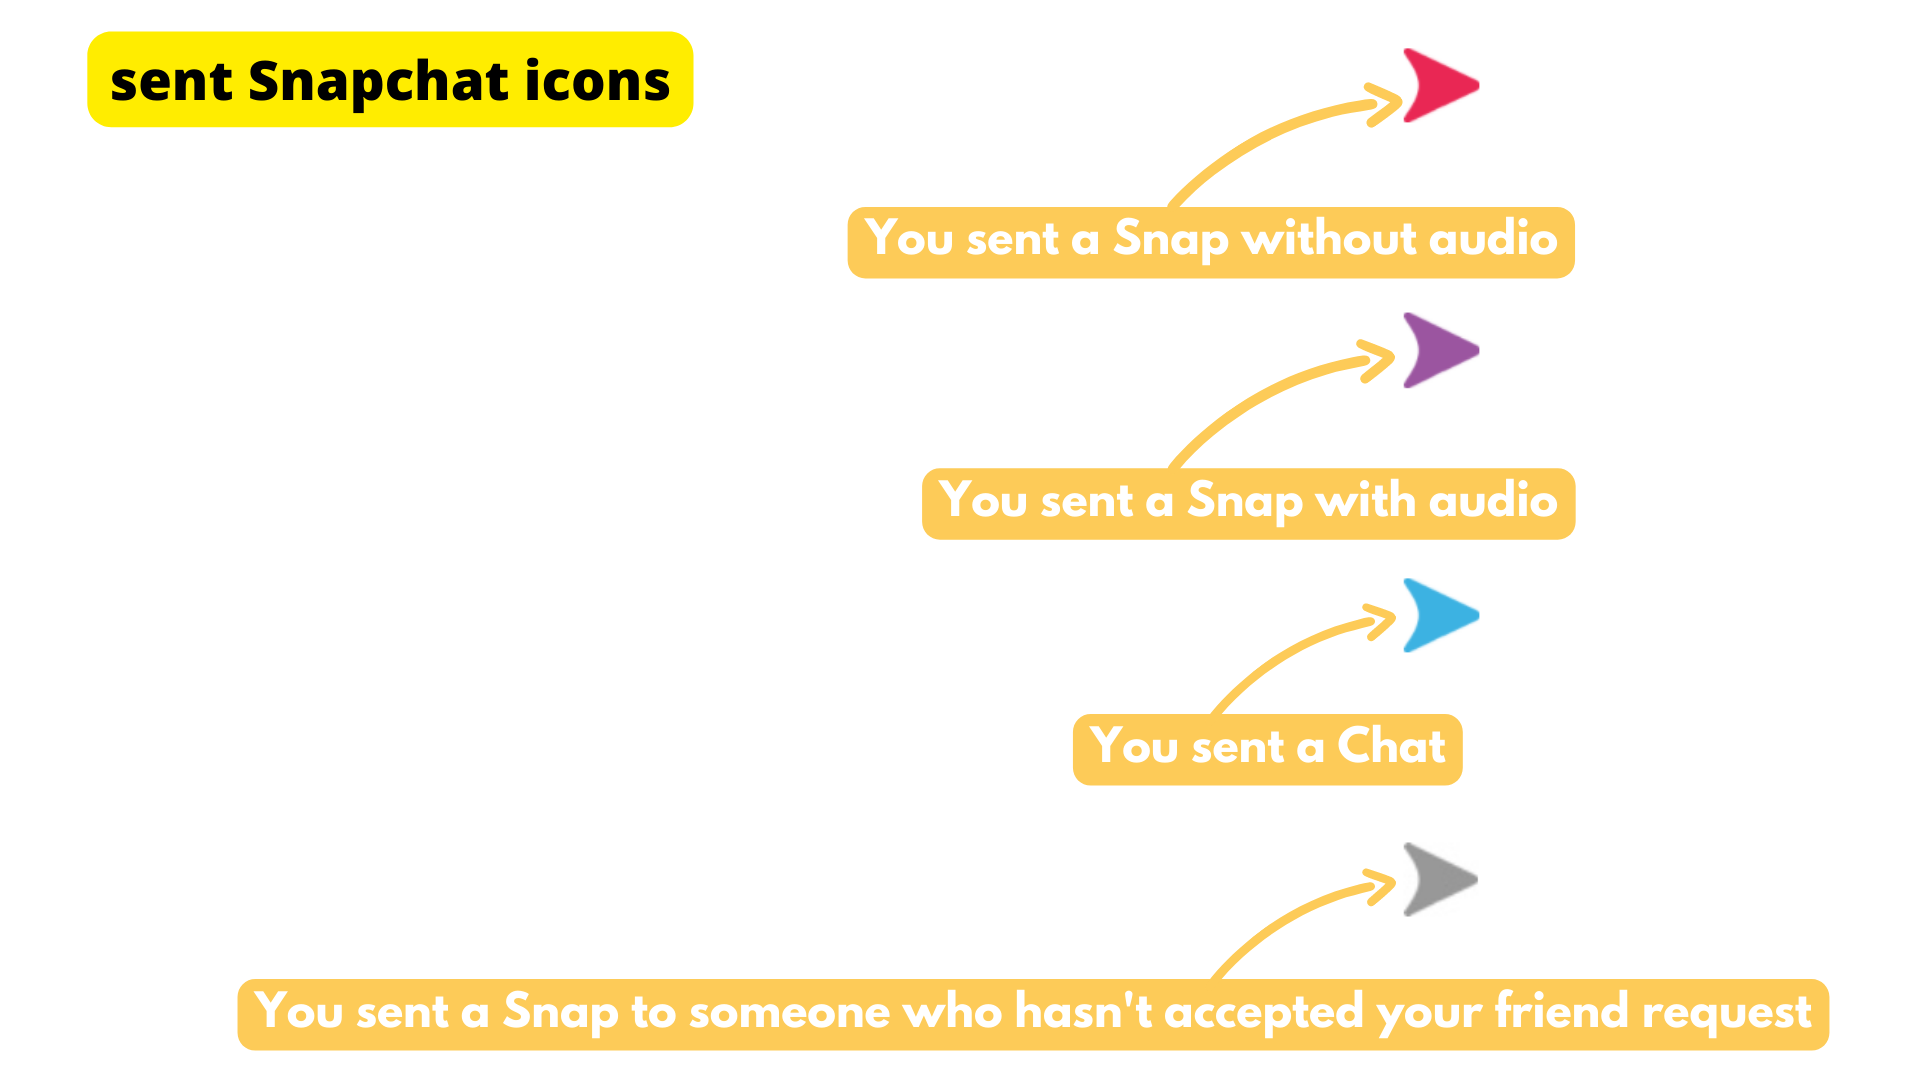 sent snapchat icons meaning